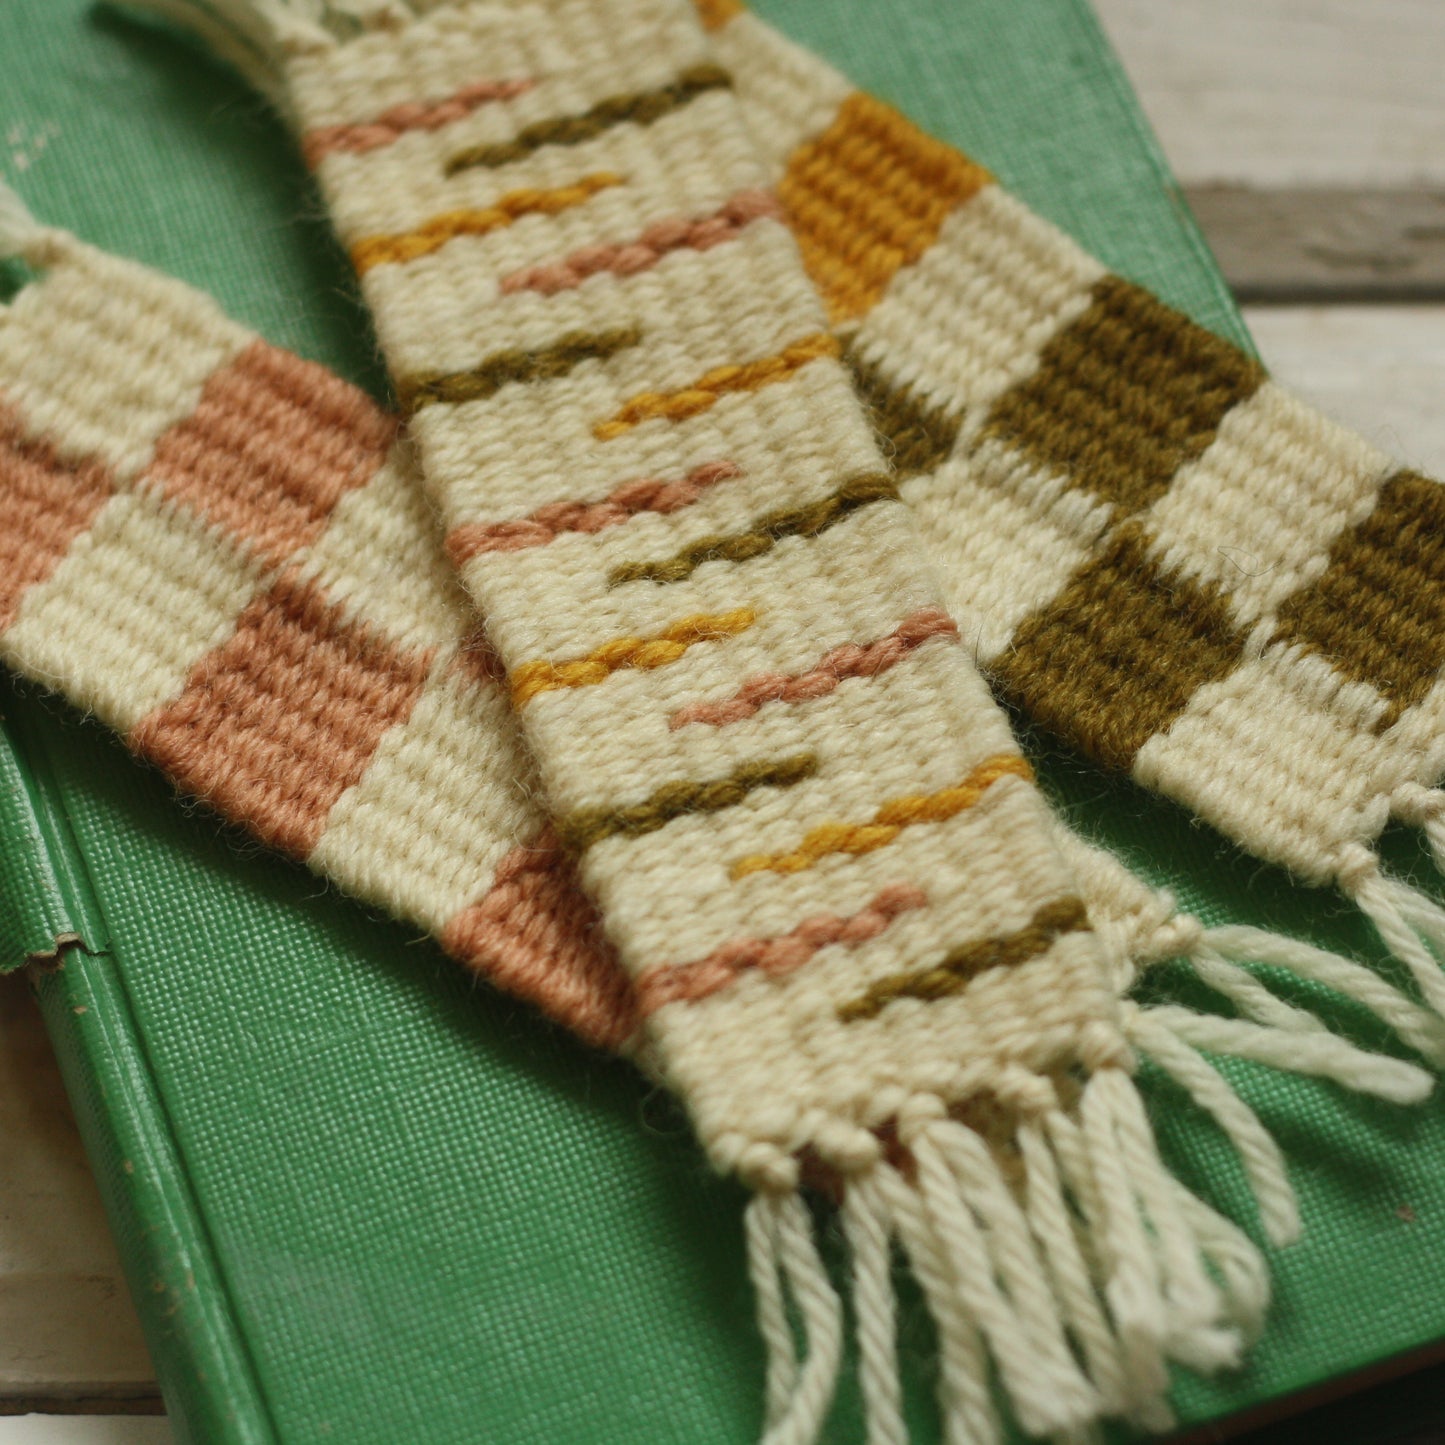 Woven Bookmarks